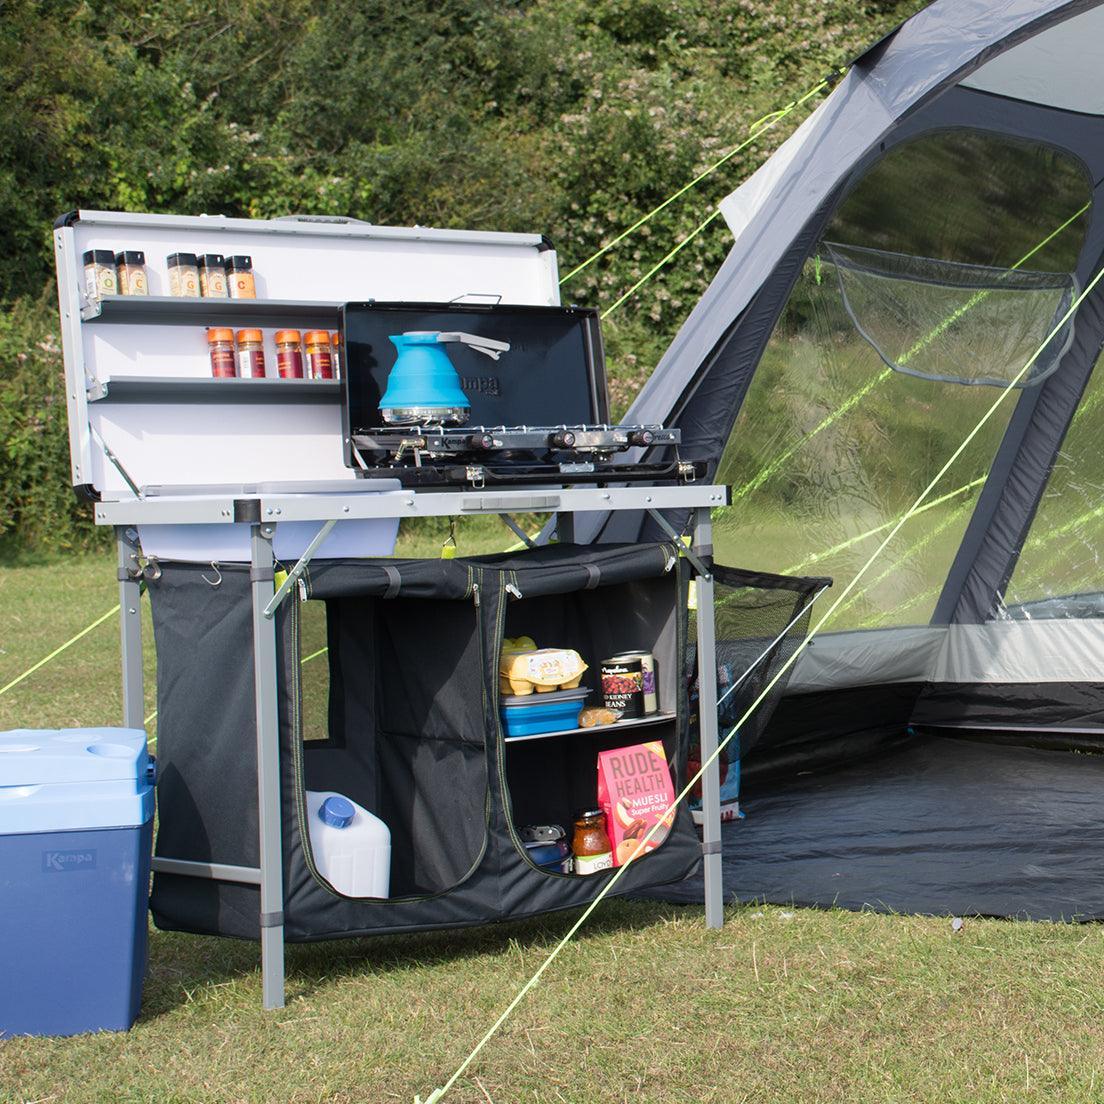 Camping Kitchens - UK Camping And Leisure